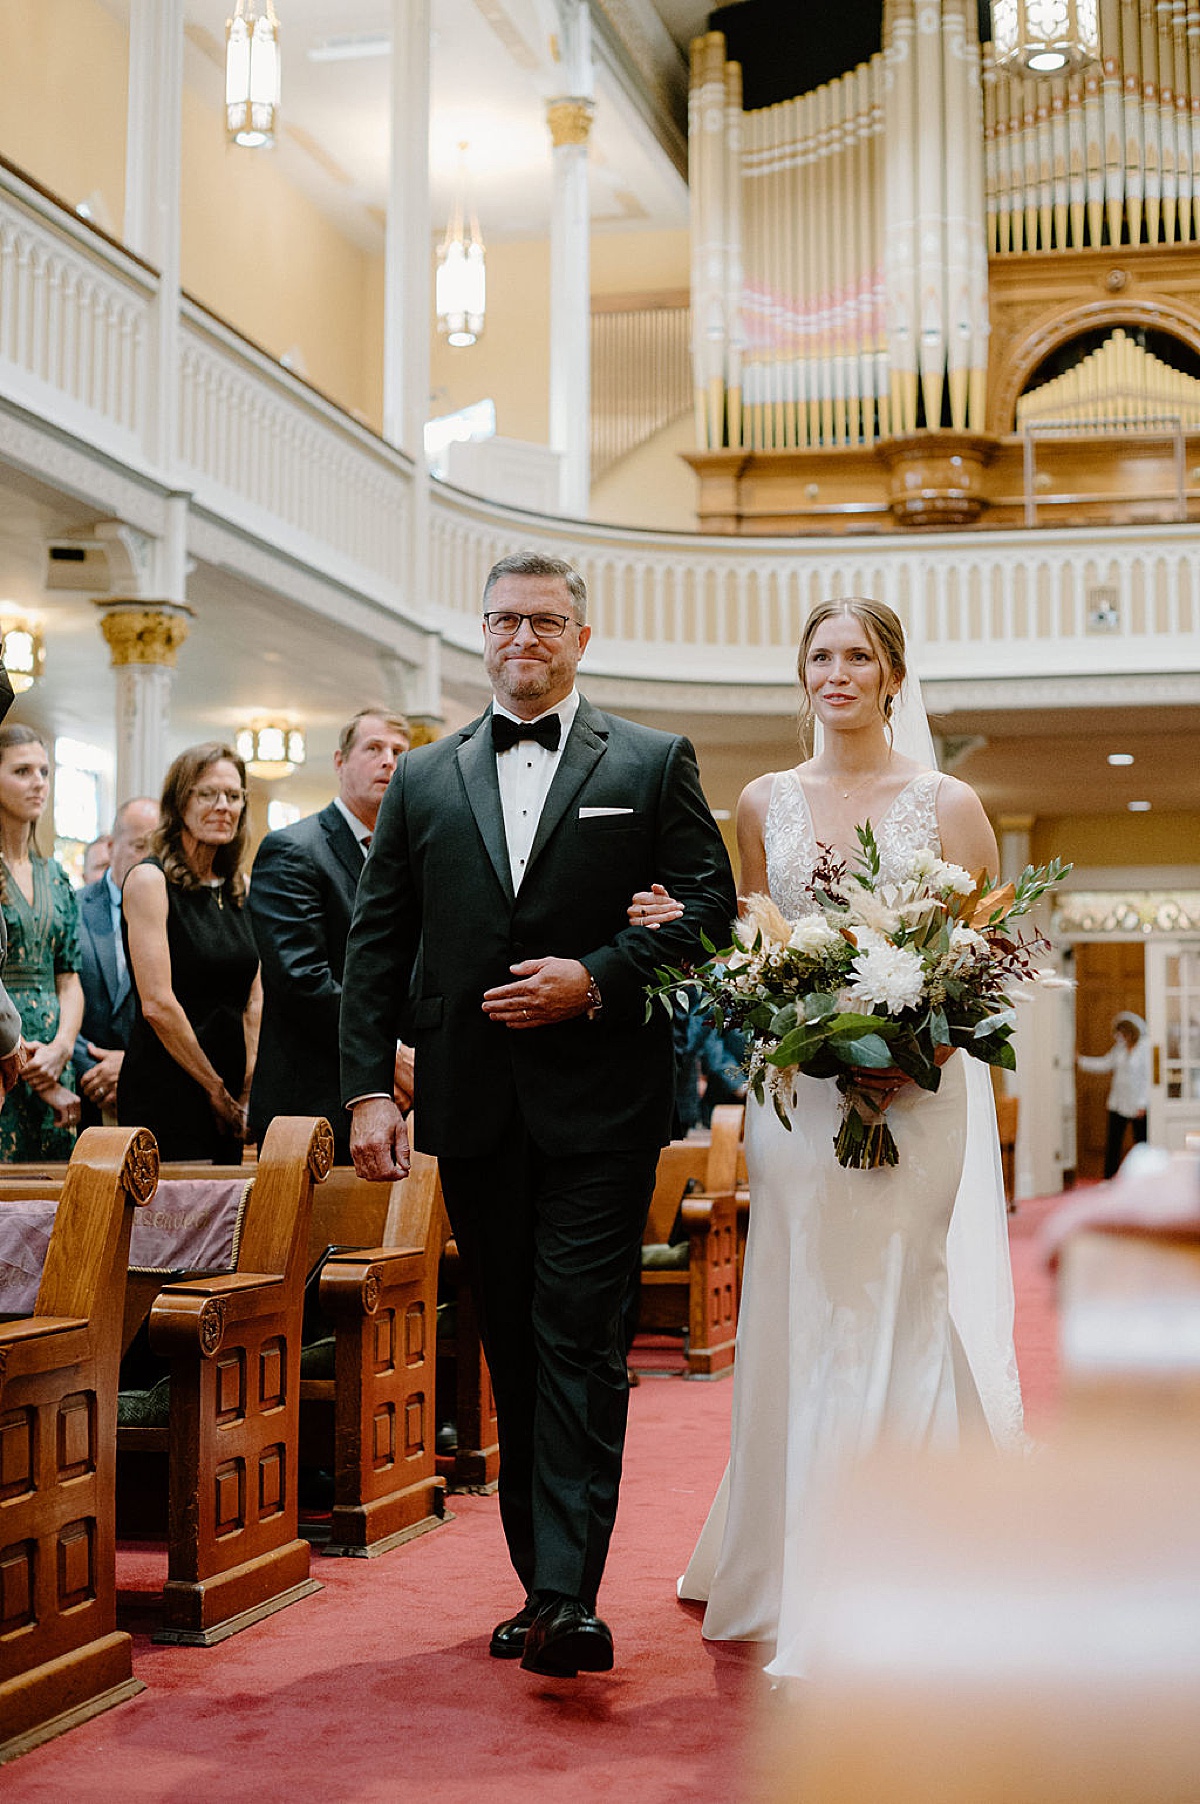 bride walks the aisle with her father during church ceremony at Idyllic Fort Wayne country club wedding